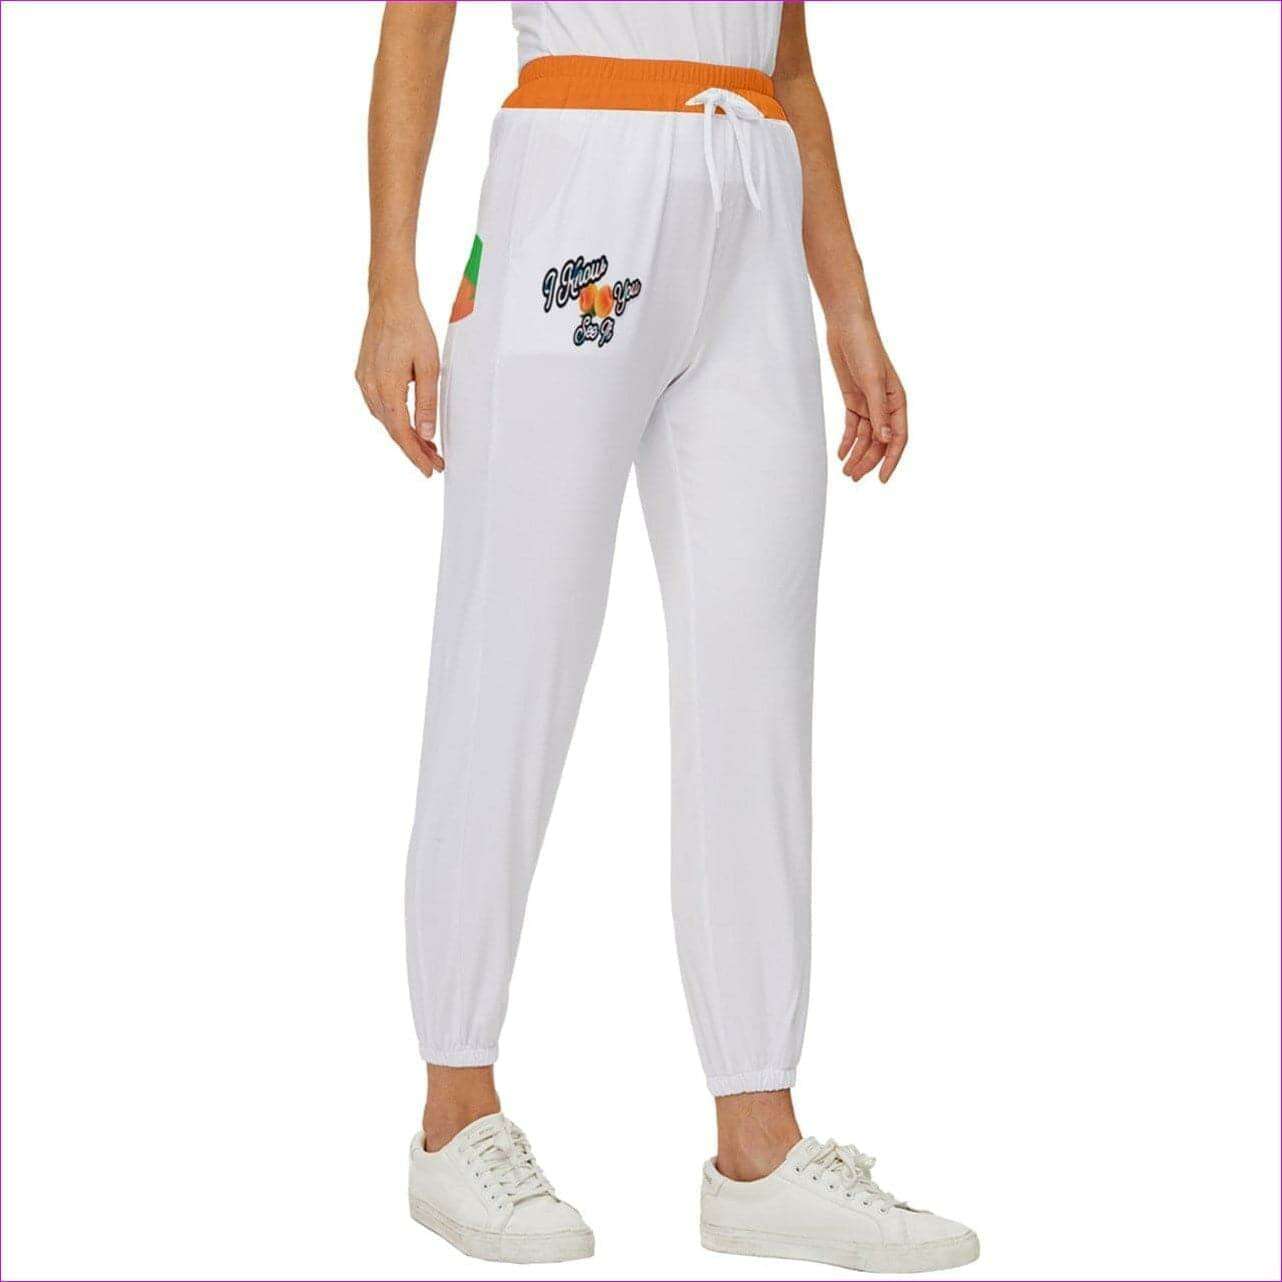 5XL - "I Know You See It" Cropped Drawstring Pants - womens sweatpants at TFC&H Co.